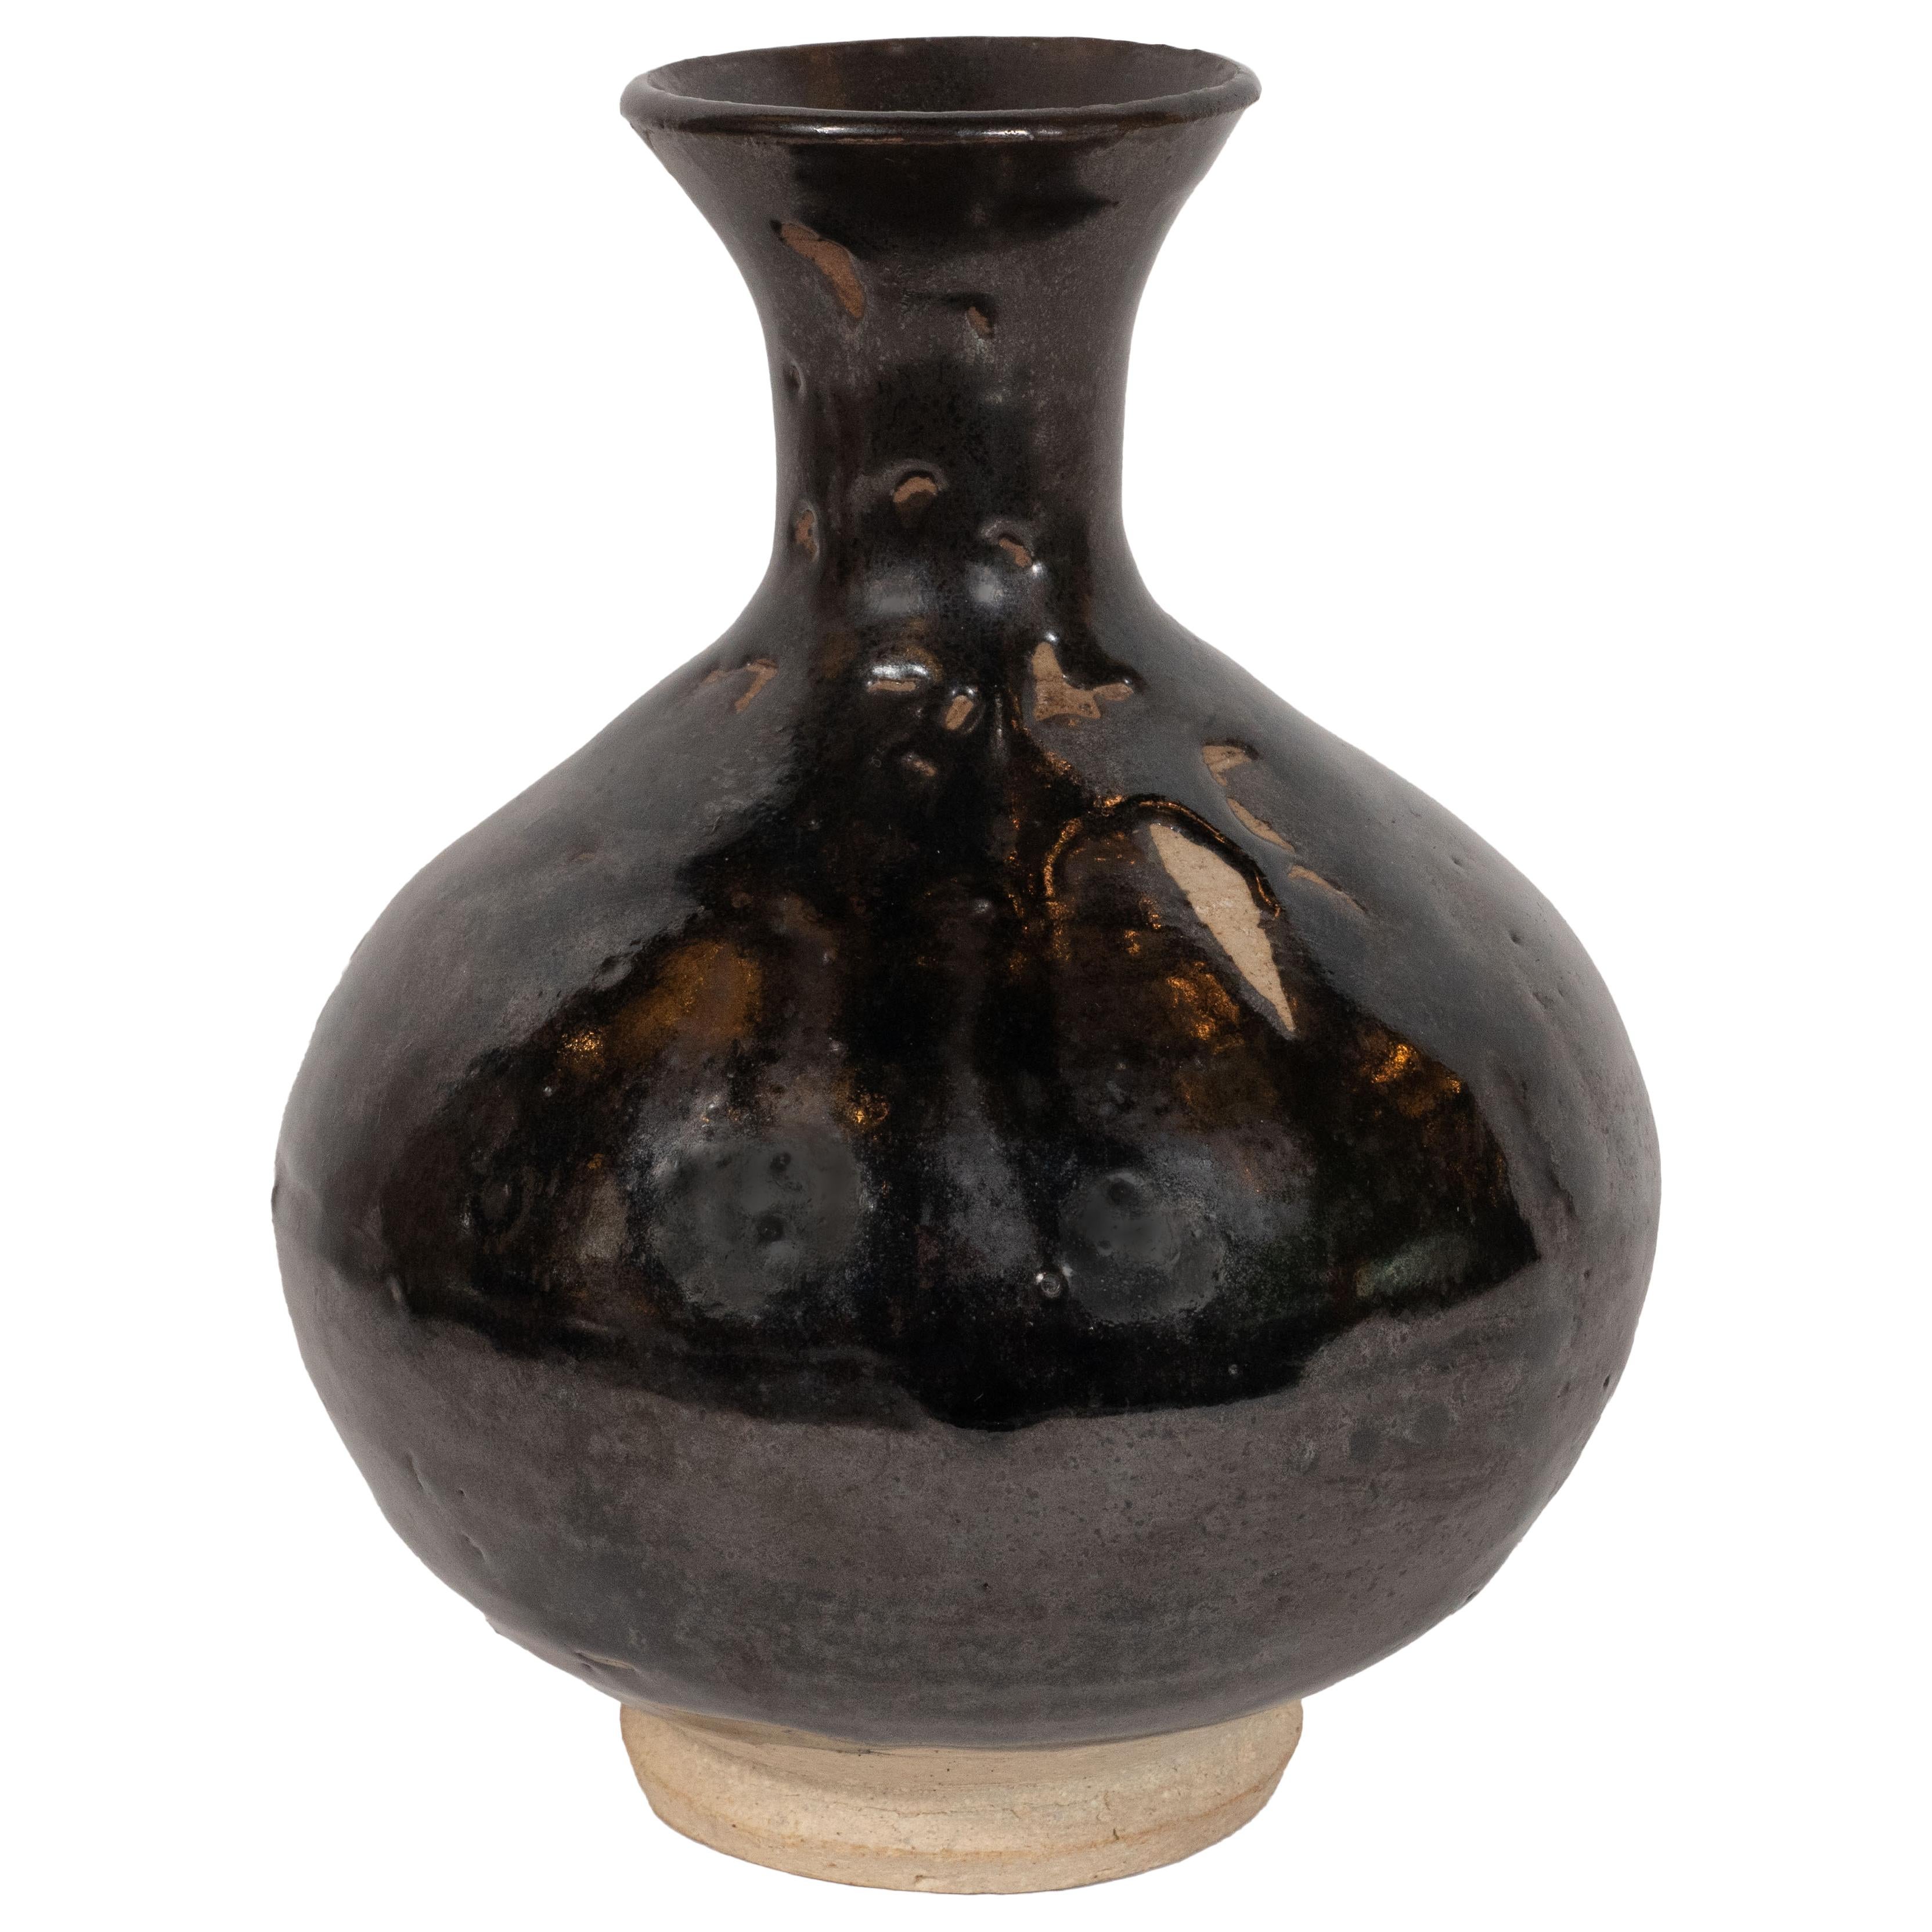 This refined Mid-Century Modern vase was realized in Denmark, circa 1960. It features a spherical body that dramatically tapers to its neck before again expanding outwards to its circular mouth. The exterior has been finished in a rich black lacquer